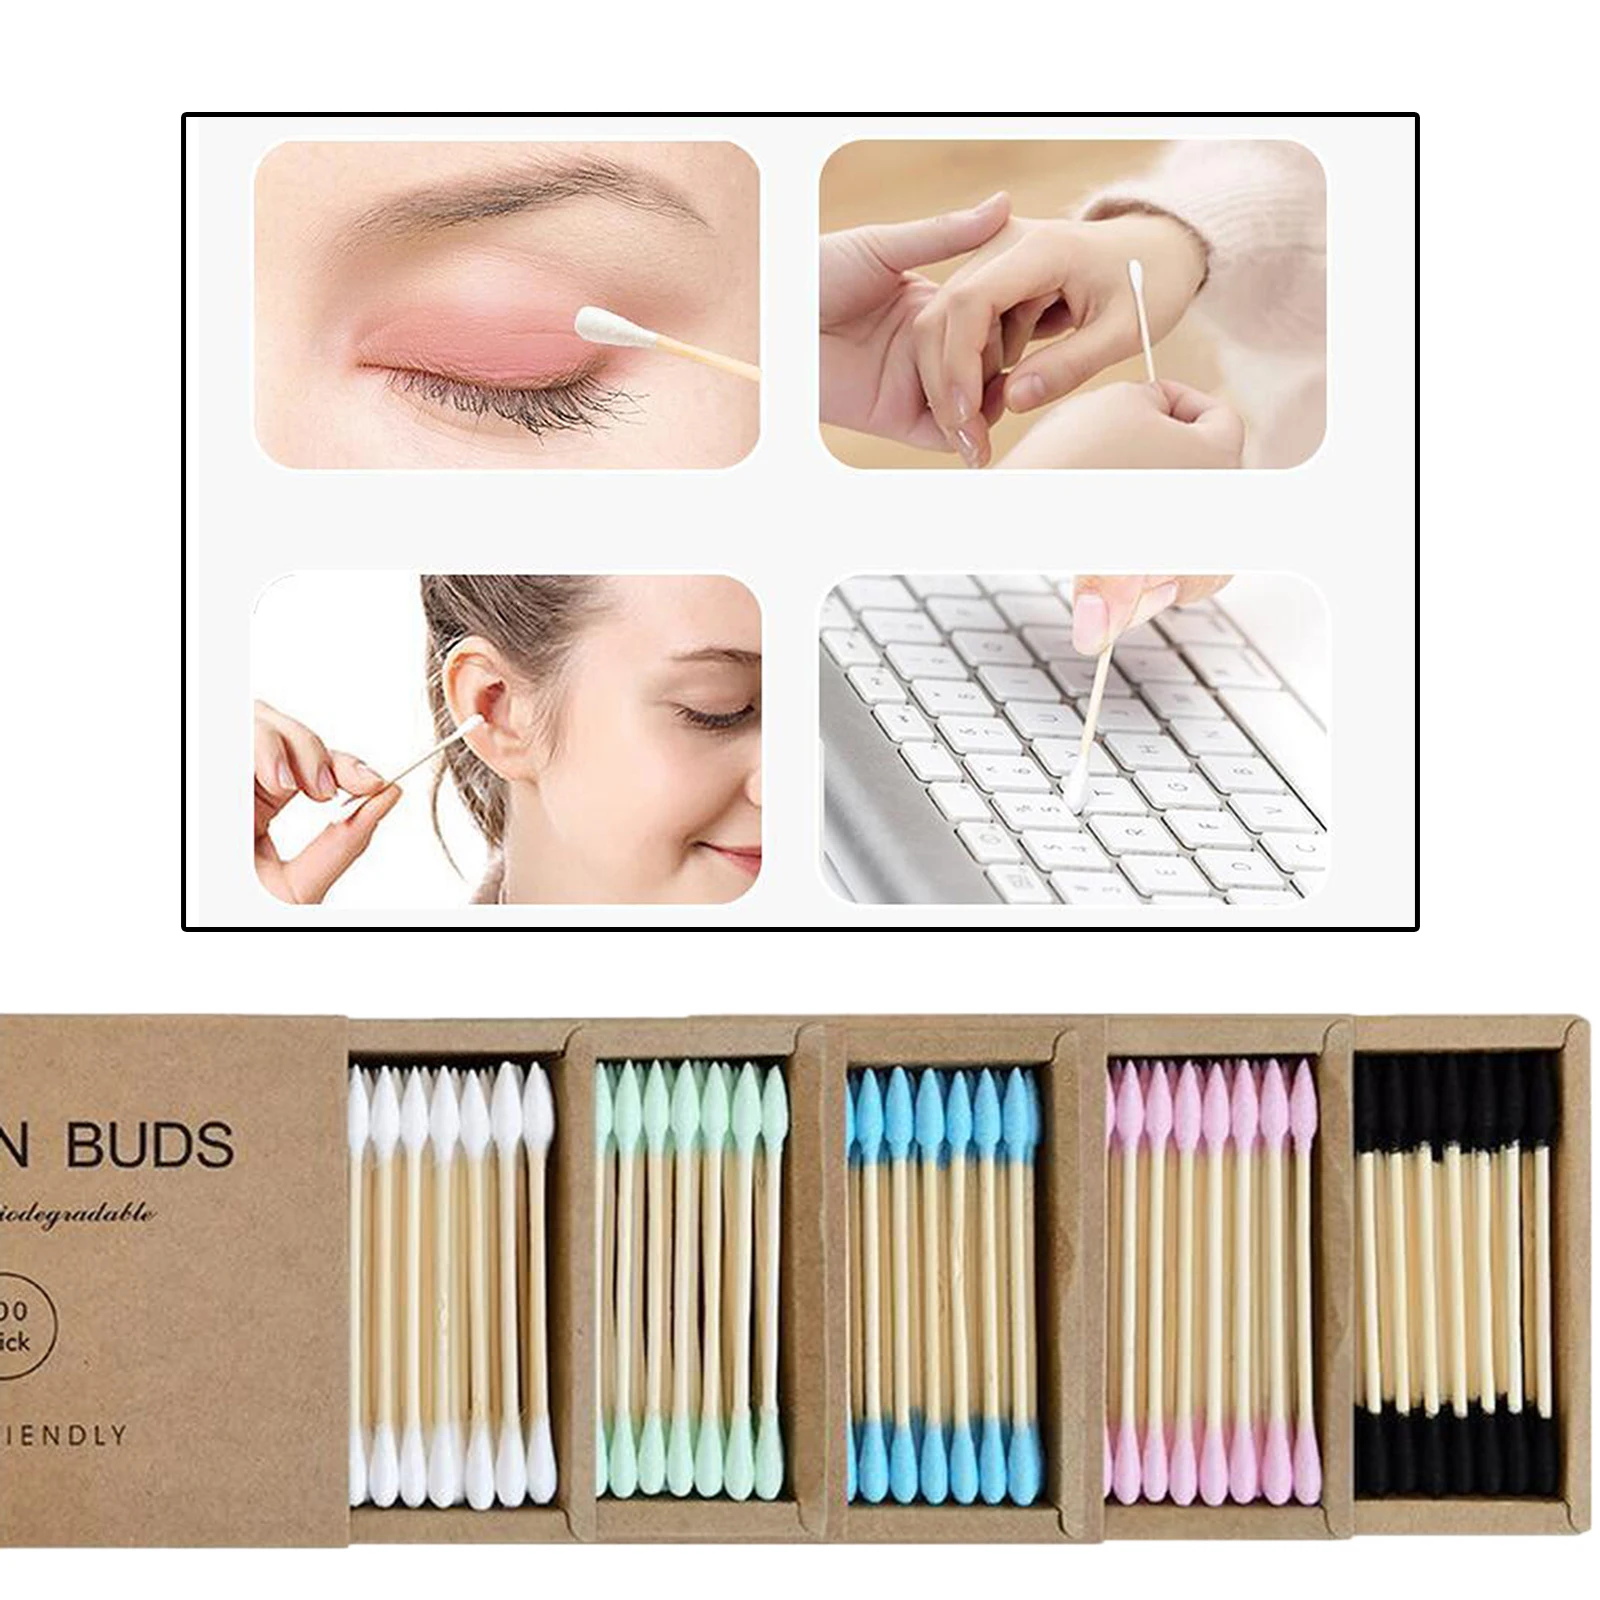 

Bamboo Cotton Swabs 200Count | Wooden Cotton Swab | Double Tipped Ear Sticks | Biodegradable cotton buds | Makeup Swab